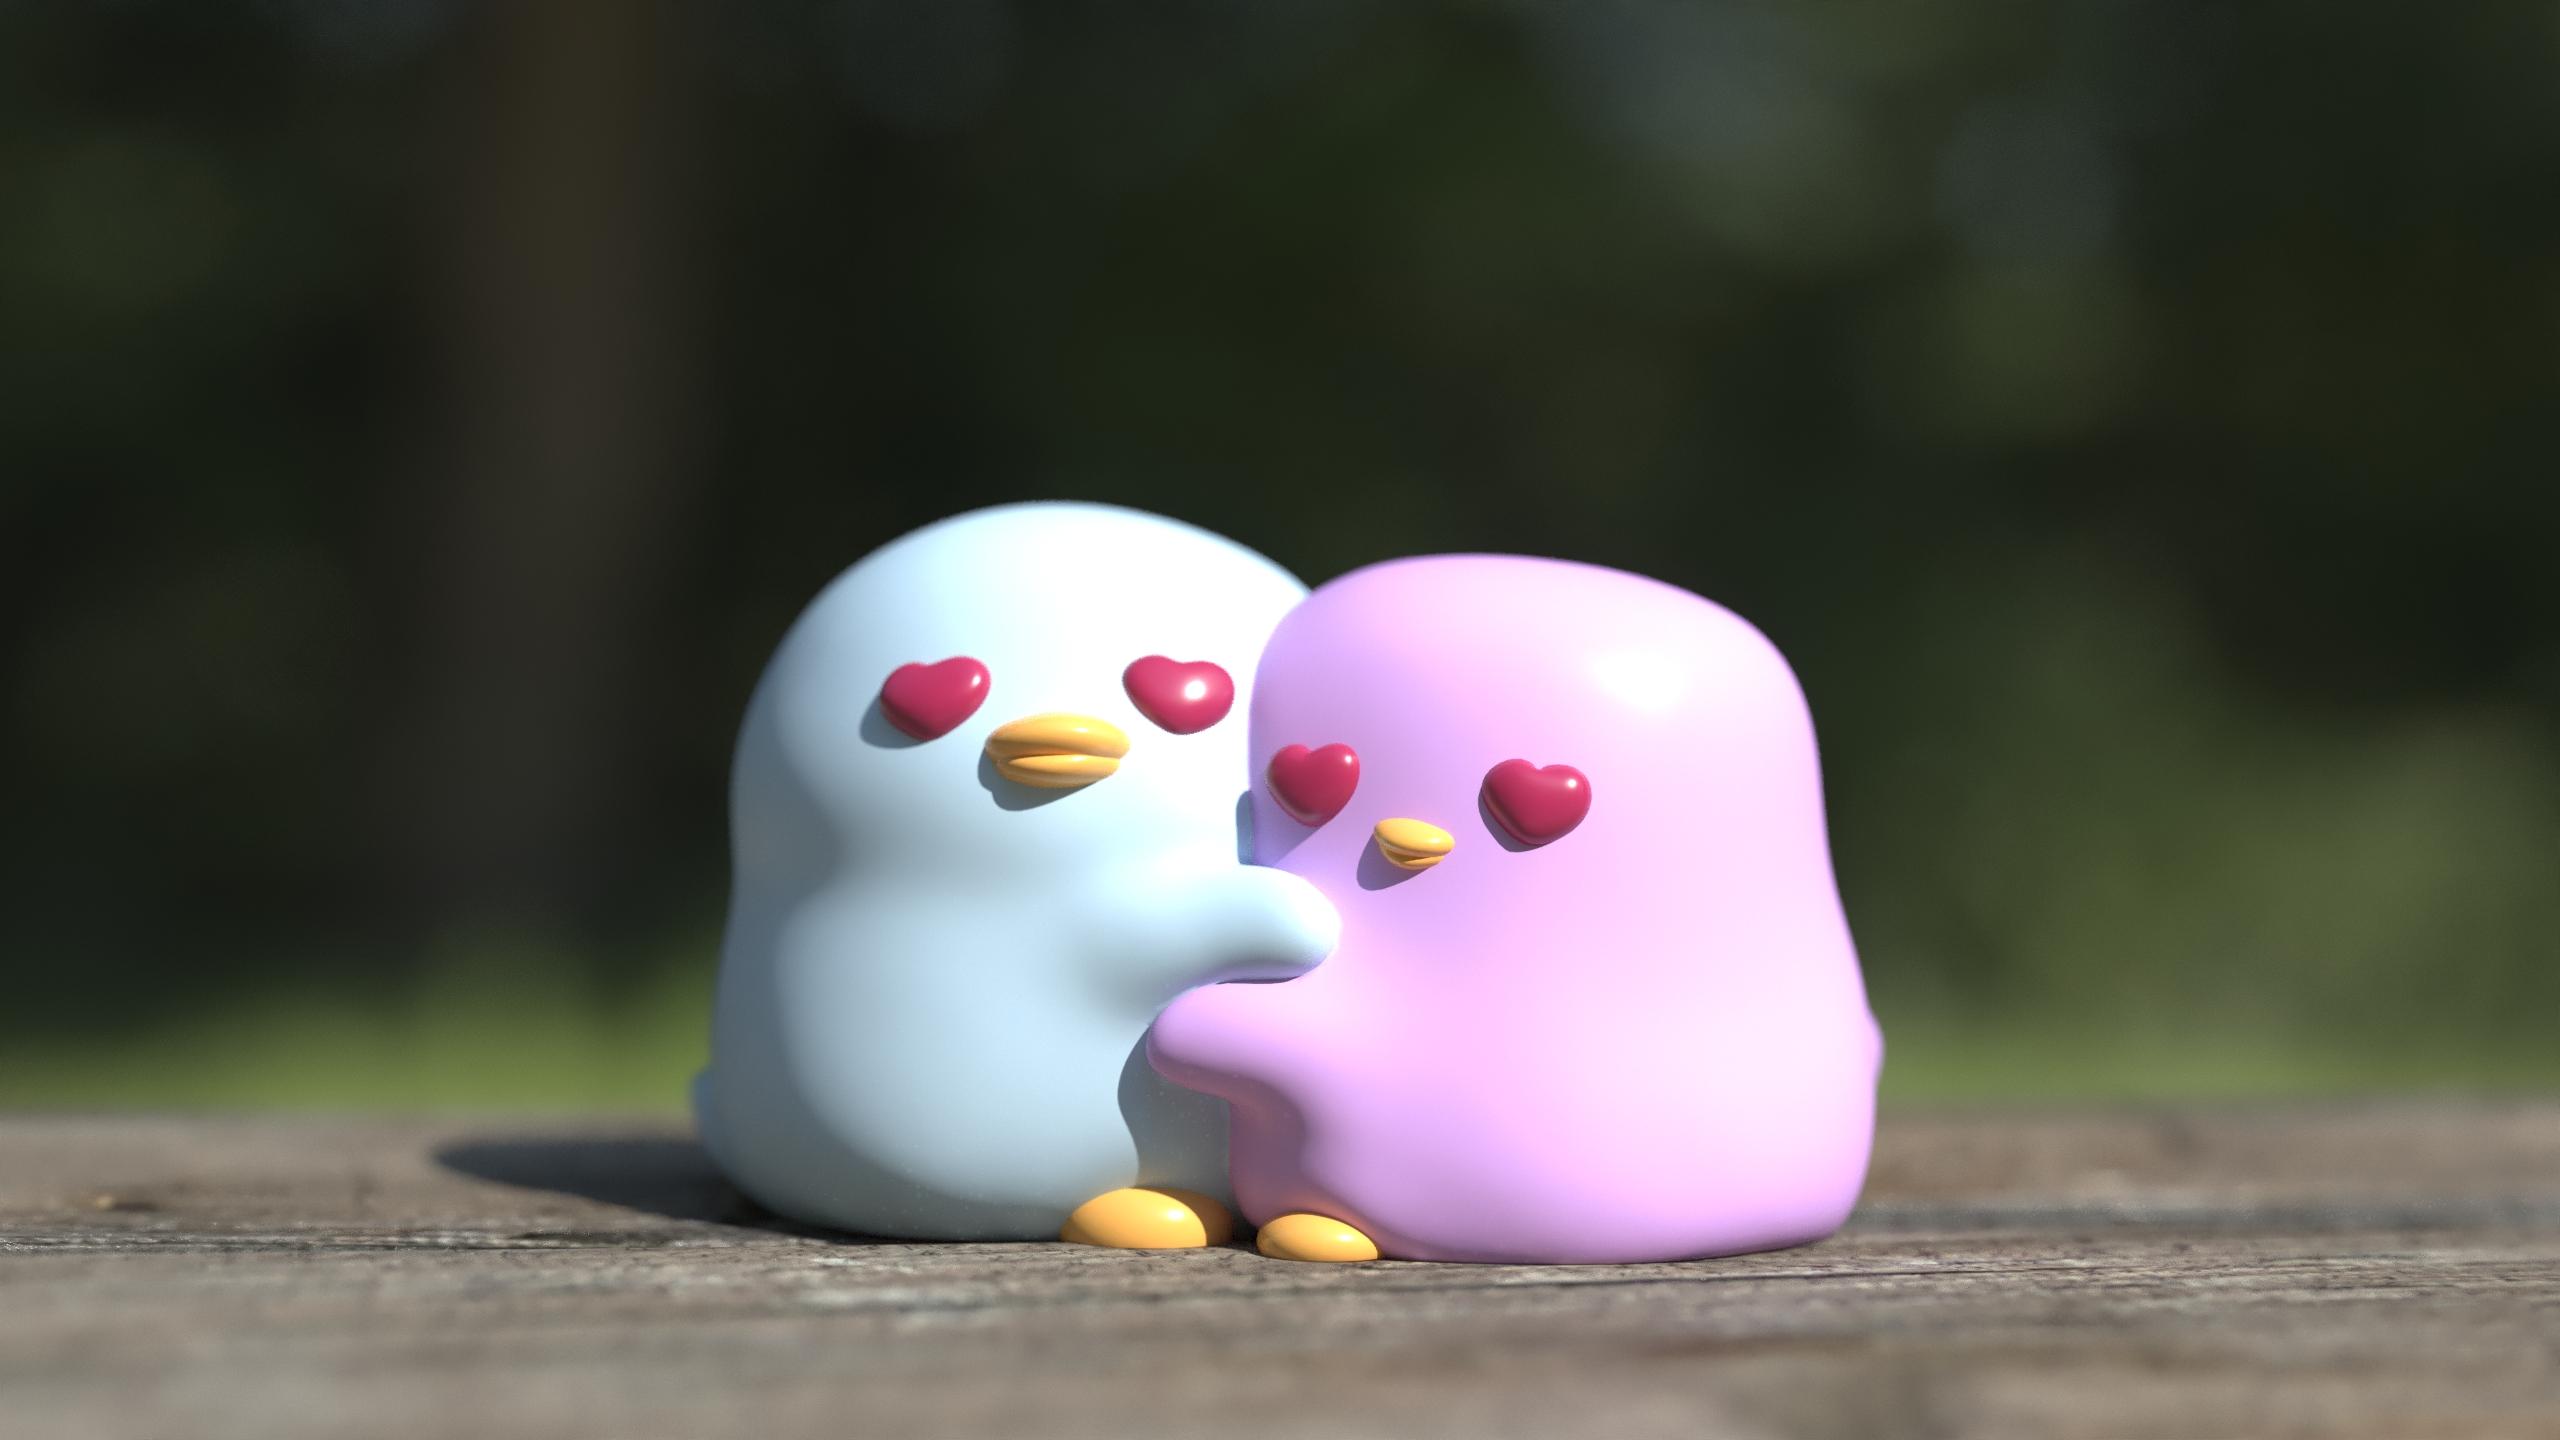 ♡♡♡ LOVE CHIKS , cute adorable and cuddly kawaii adorable , cuddling ducklings by TinyMakers3D 3d model